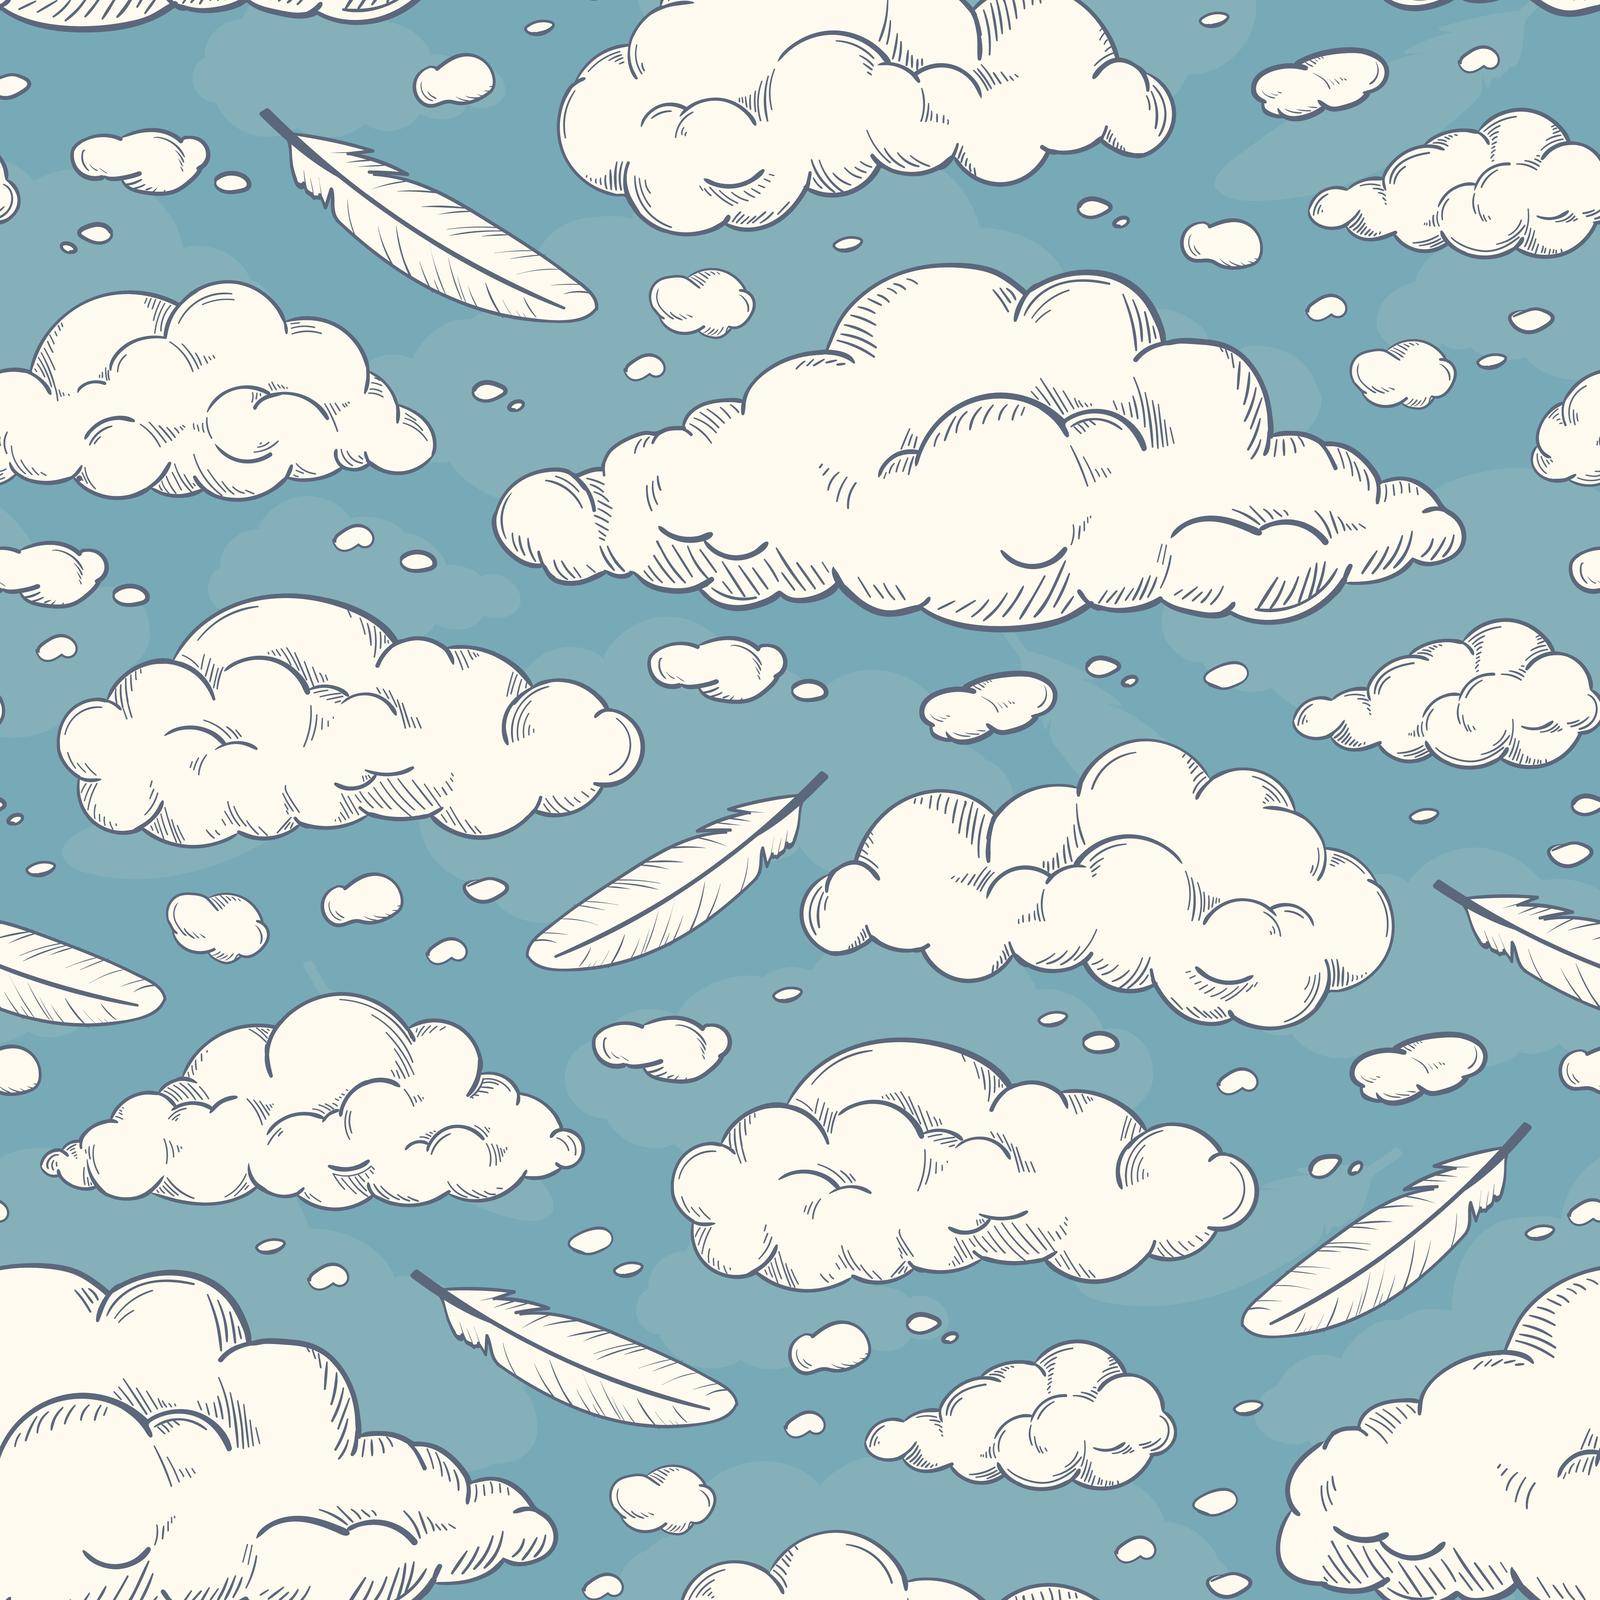 seamless repeating pattern of clouds by IlyaYorkow